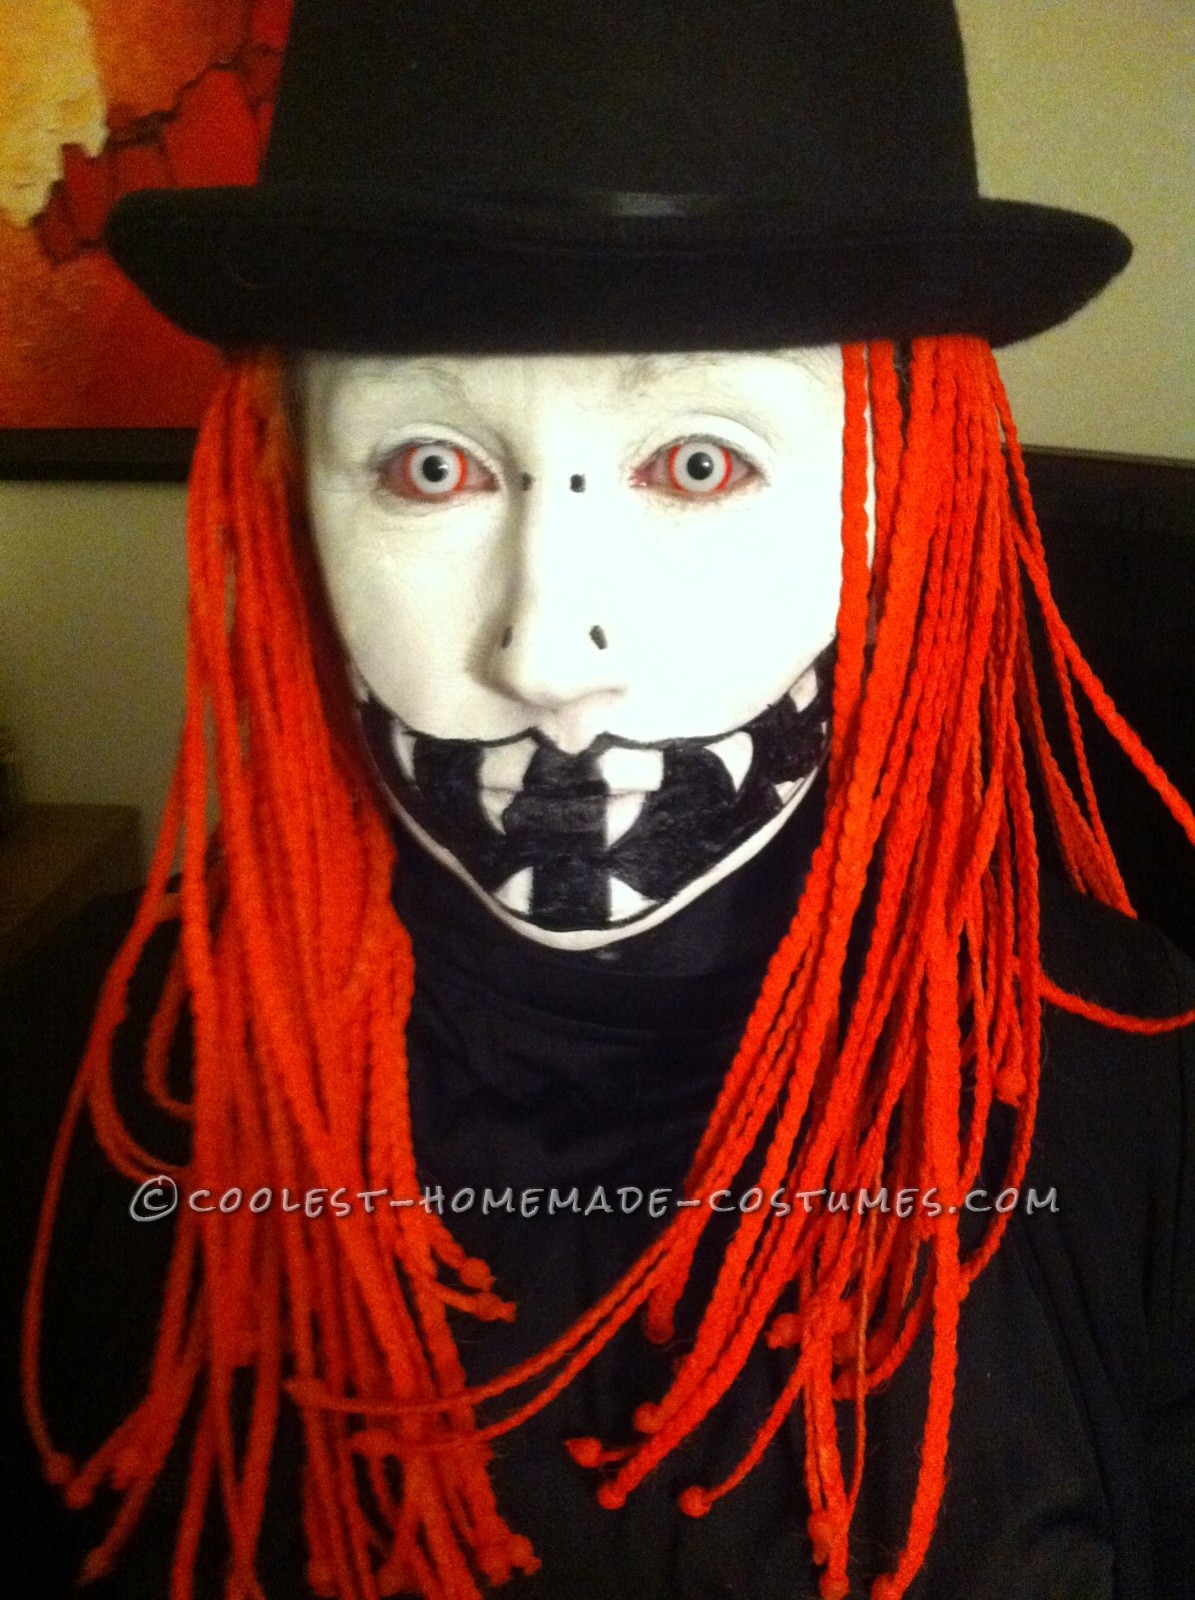 Creepy DIY Costume with orange Hair and Wicked Face